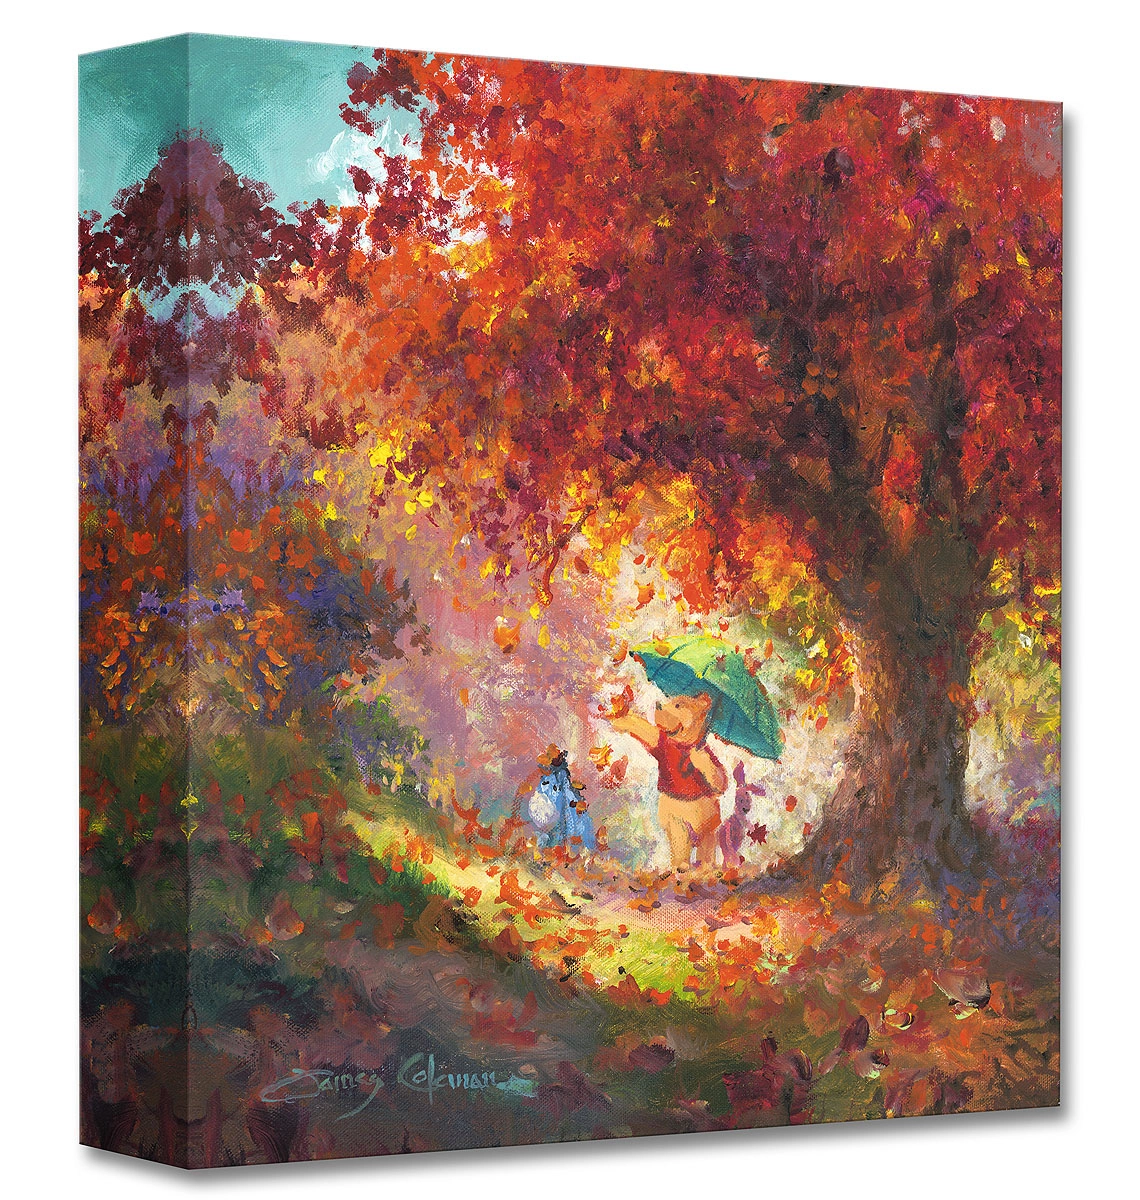 James Coleman Autumn Leaves Gently Falling From Disney Winnie The Pooh Gallery Wrapped Giclee On Canvas